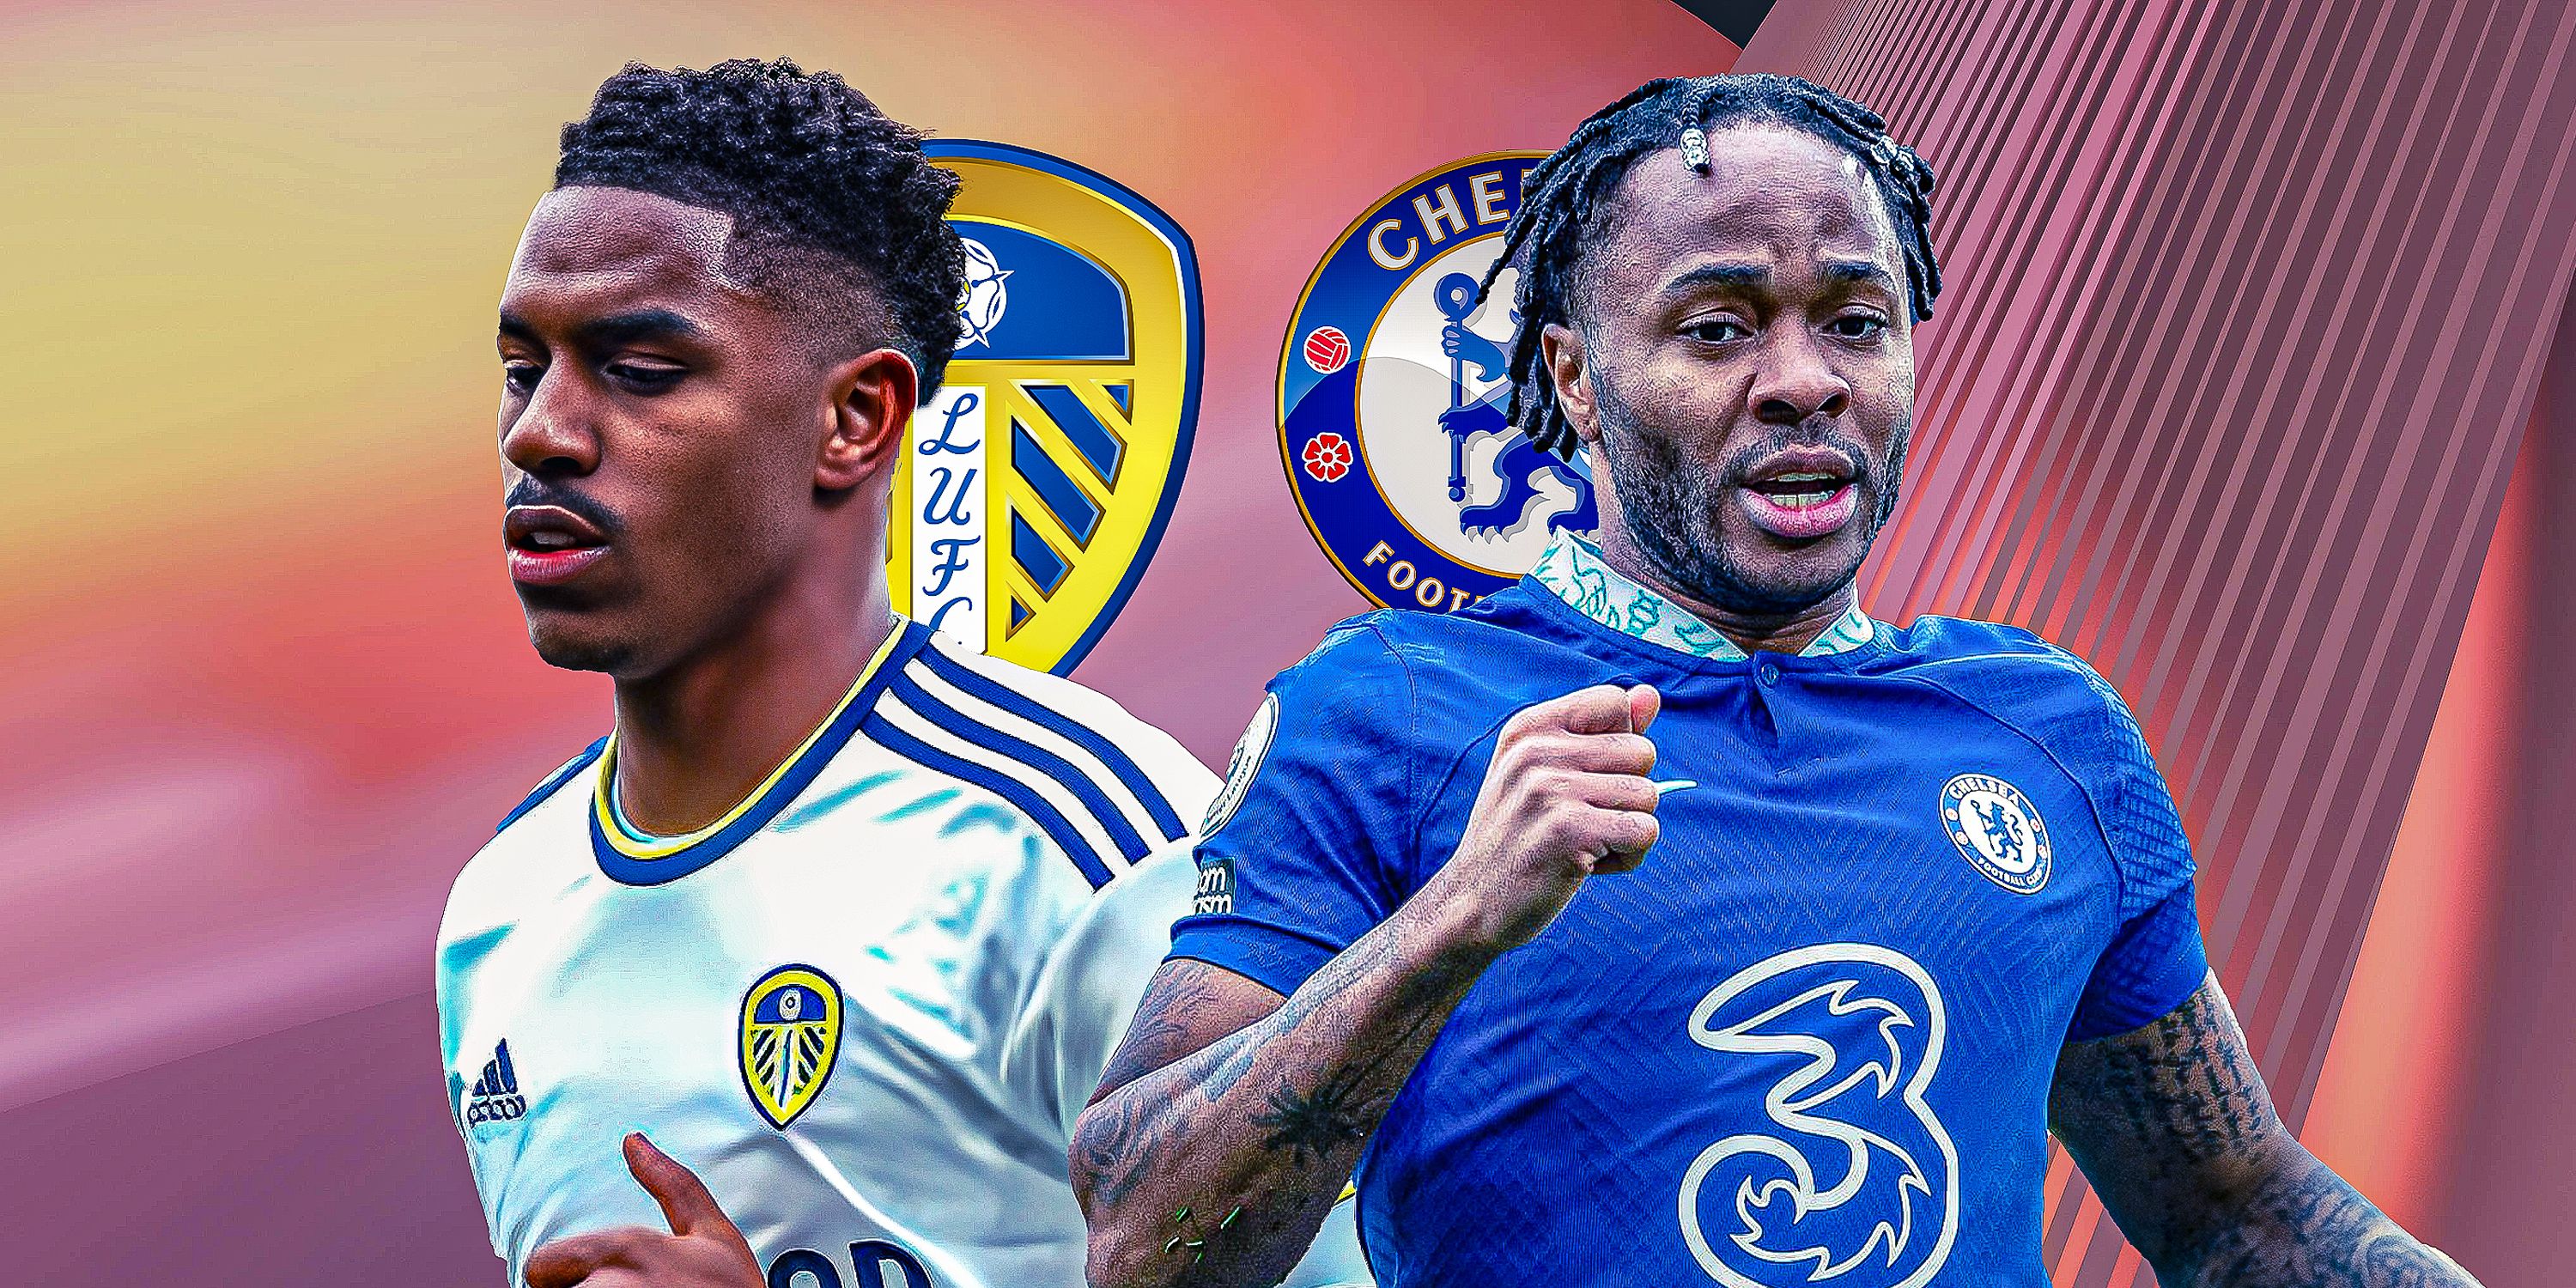 Why-Chelsea-vs-Leeds-is-one-of-the-fiercest-rivalries-in-English-football-image